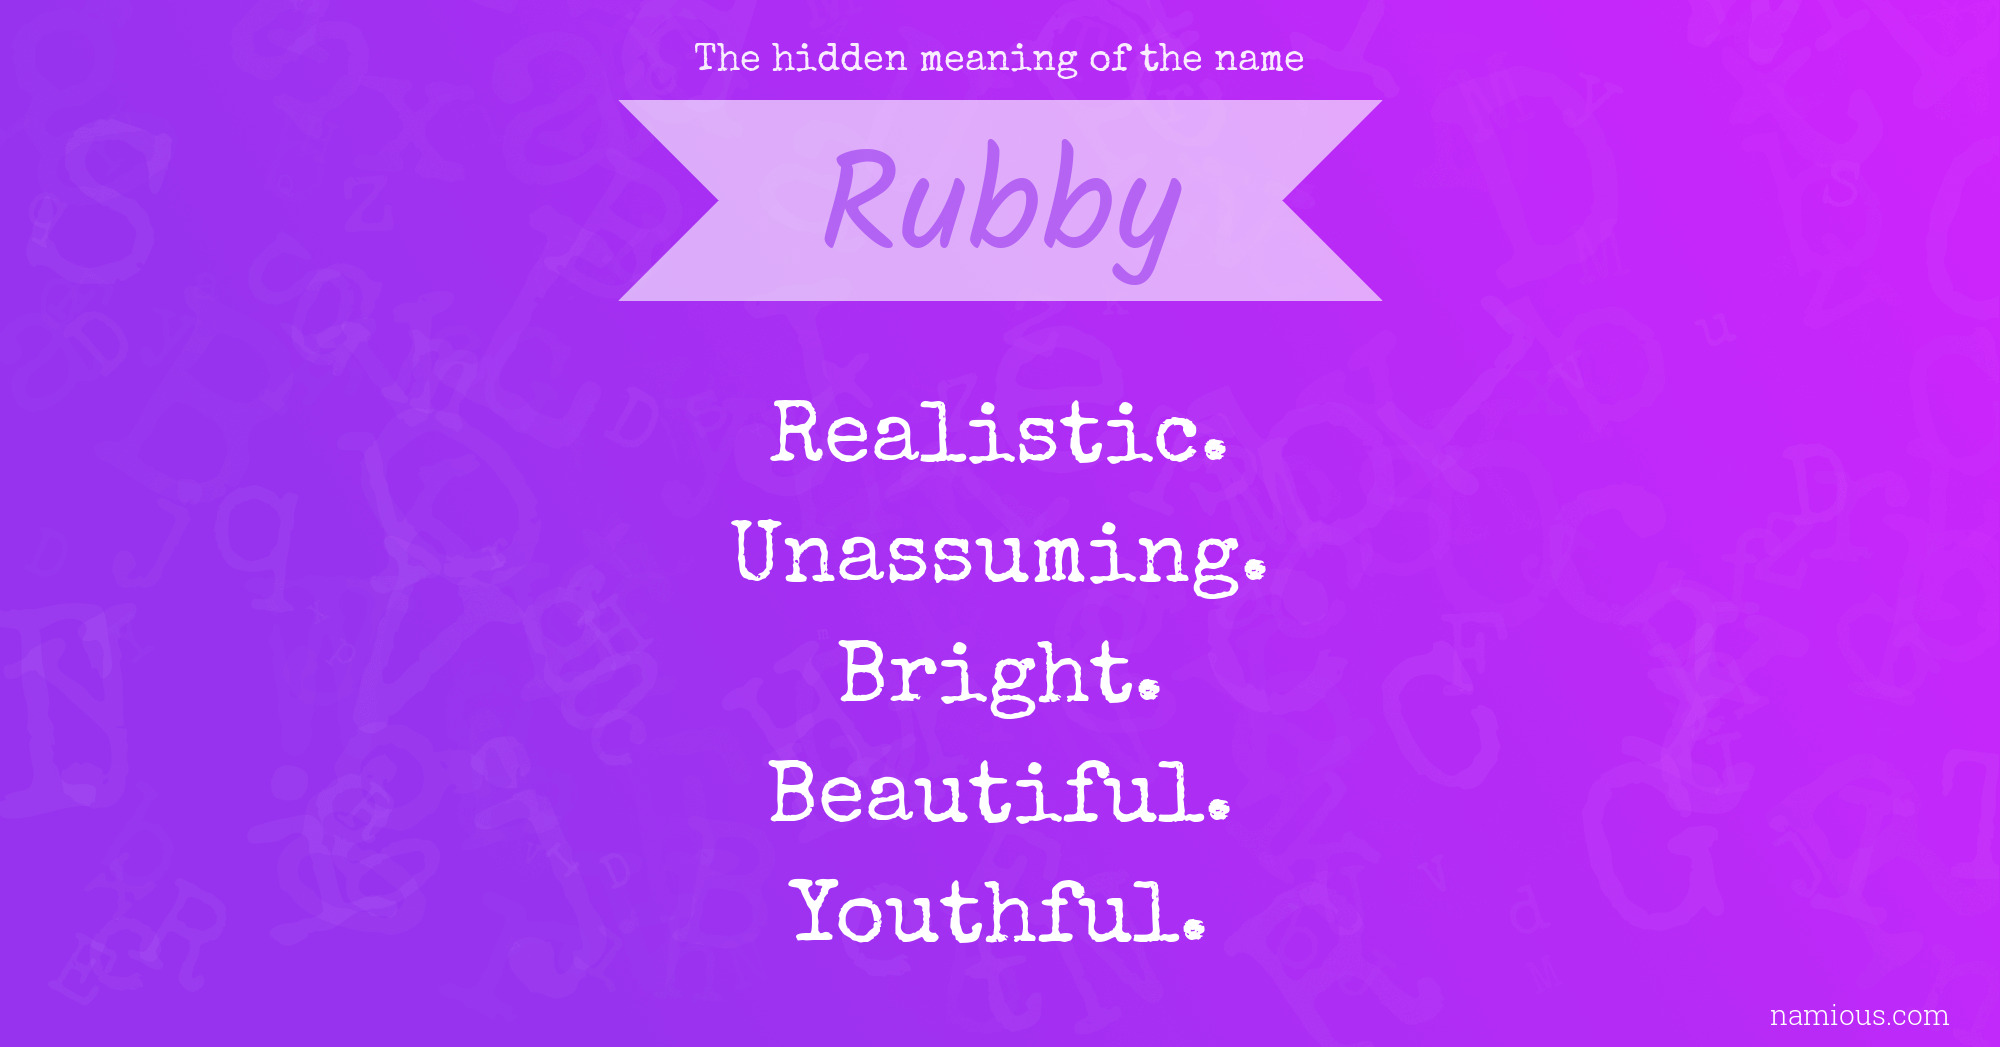 The hidden meaning of the name Rubby